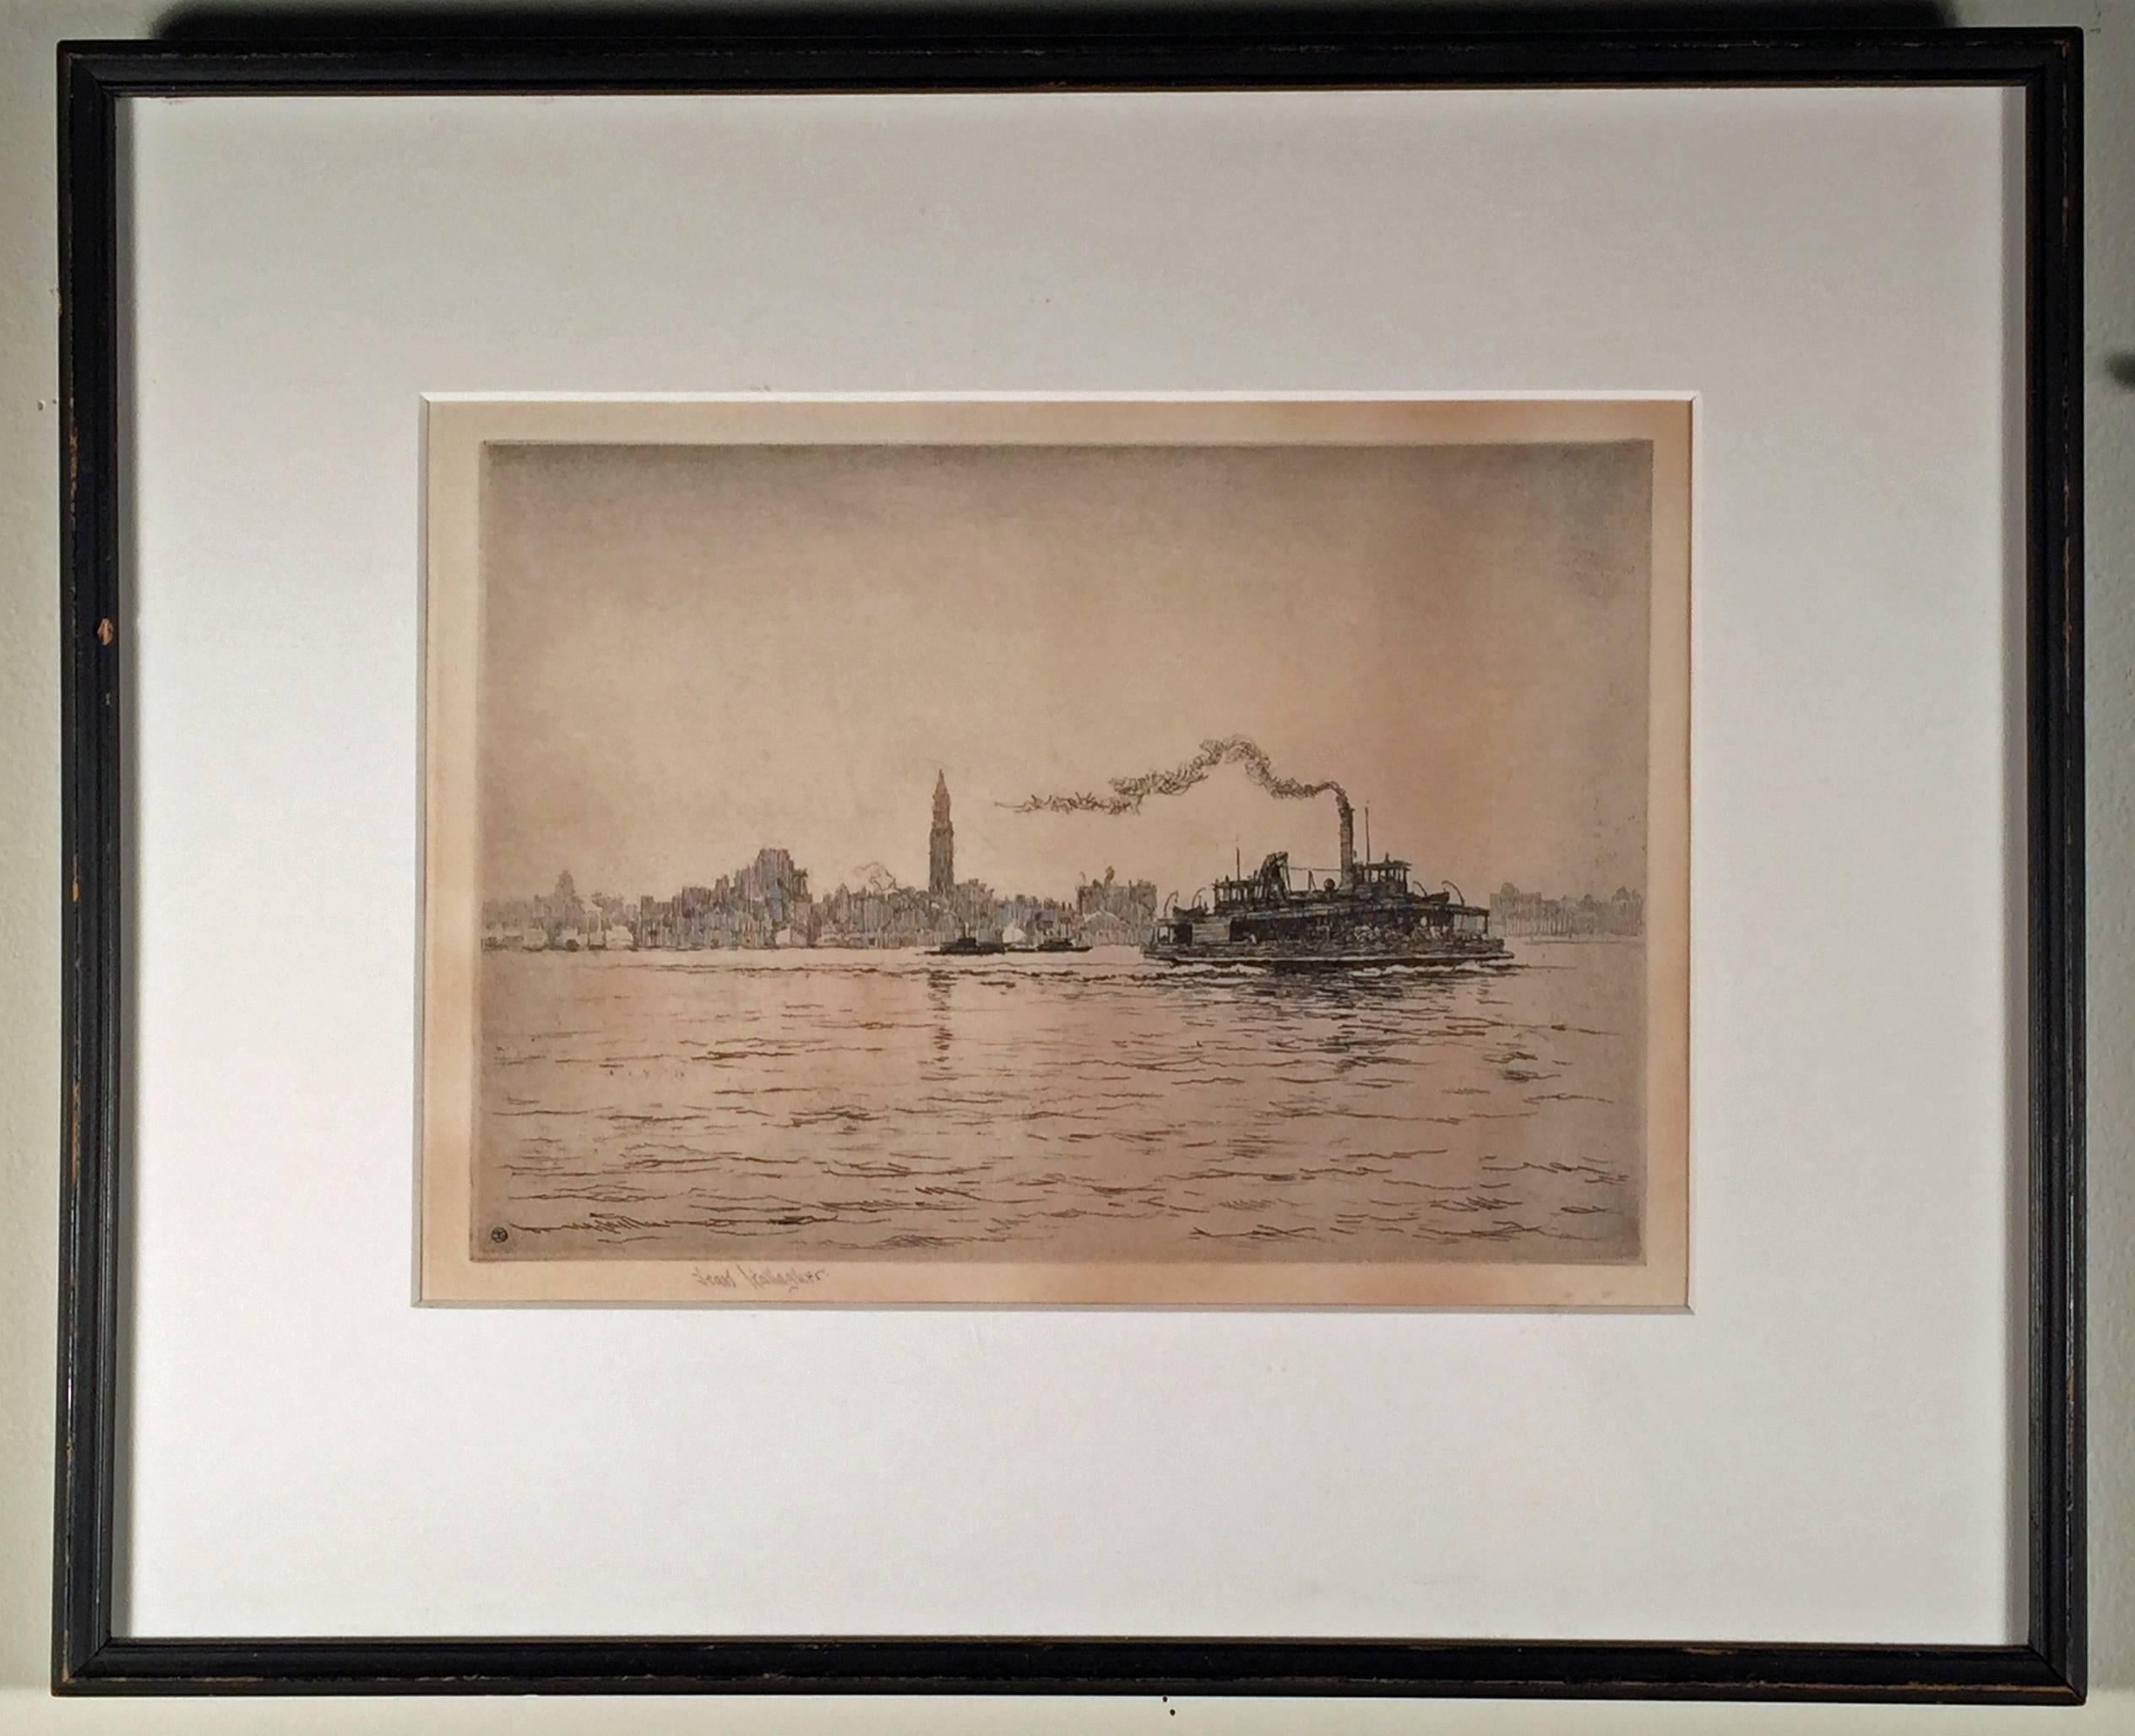  BOSTON HARBOR FROM SOUTH BOSTON - Print by Sears Gallagher